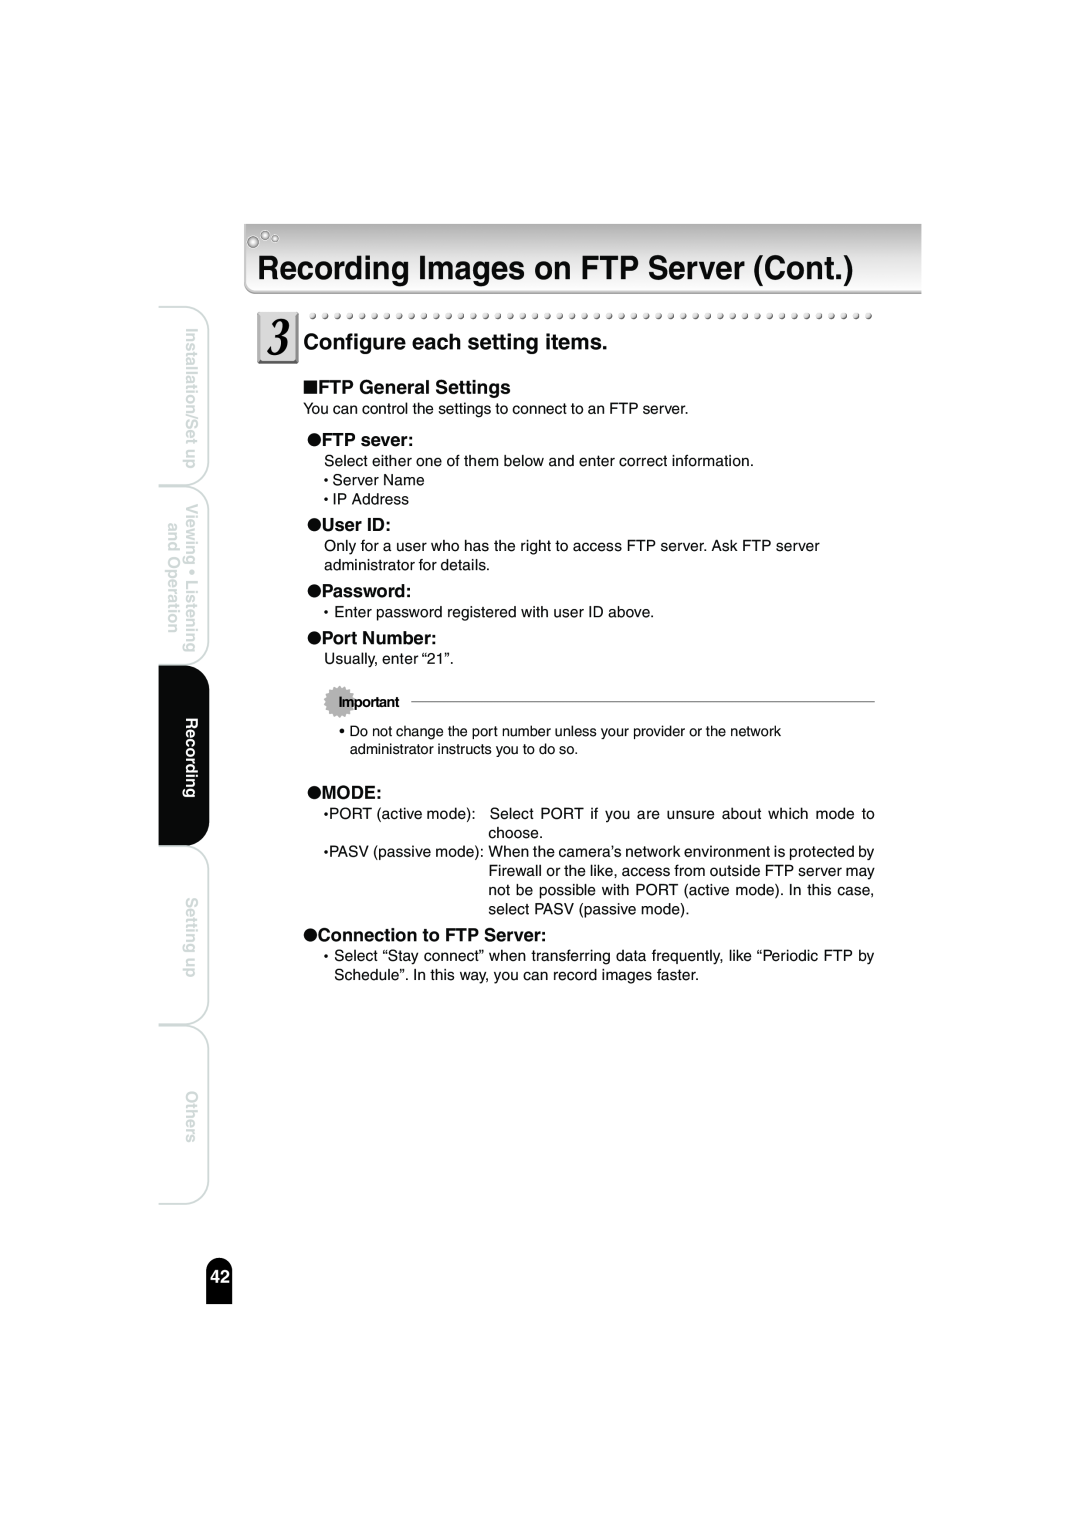 Toshiba IK-WB02A Recording Images on FTP Server Cont, FTP General Settings, FTP sever, User ID, Password, Port Number 